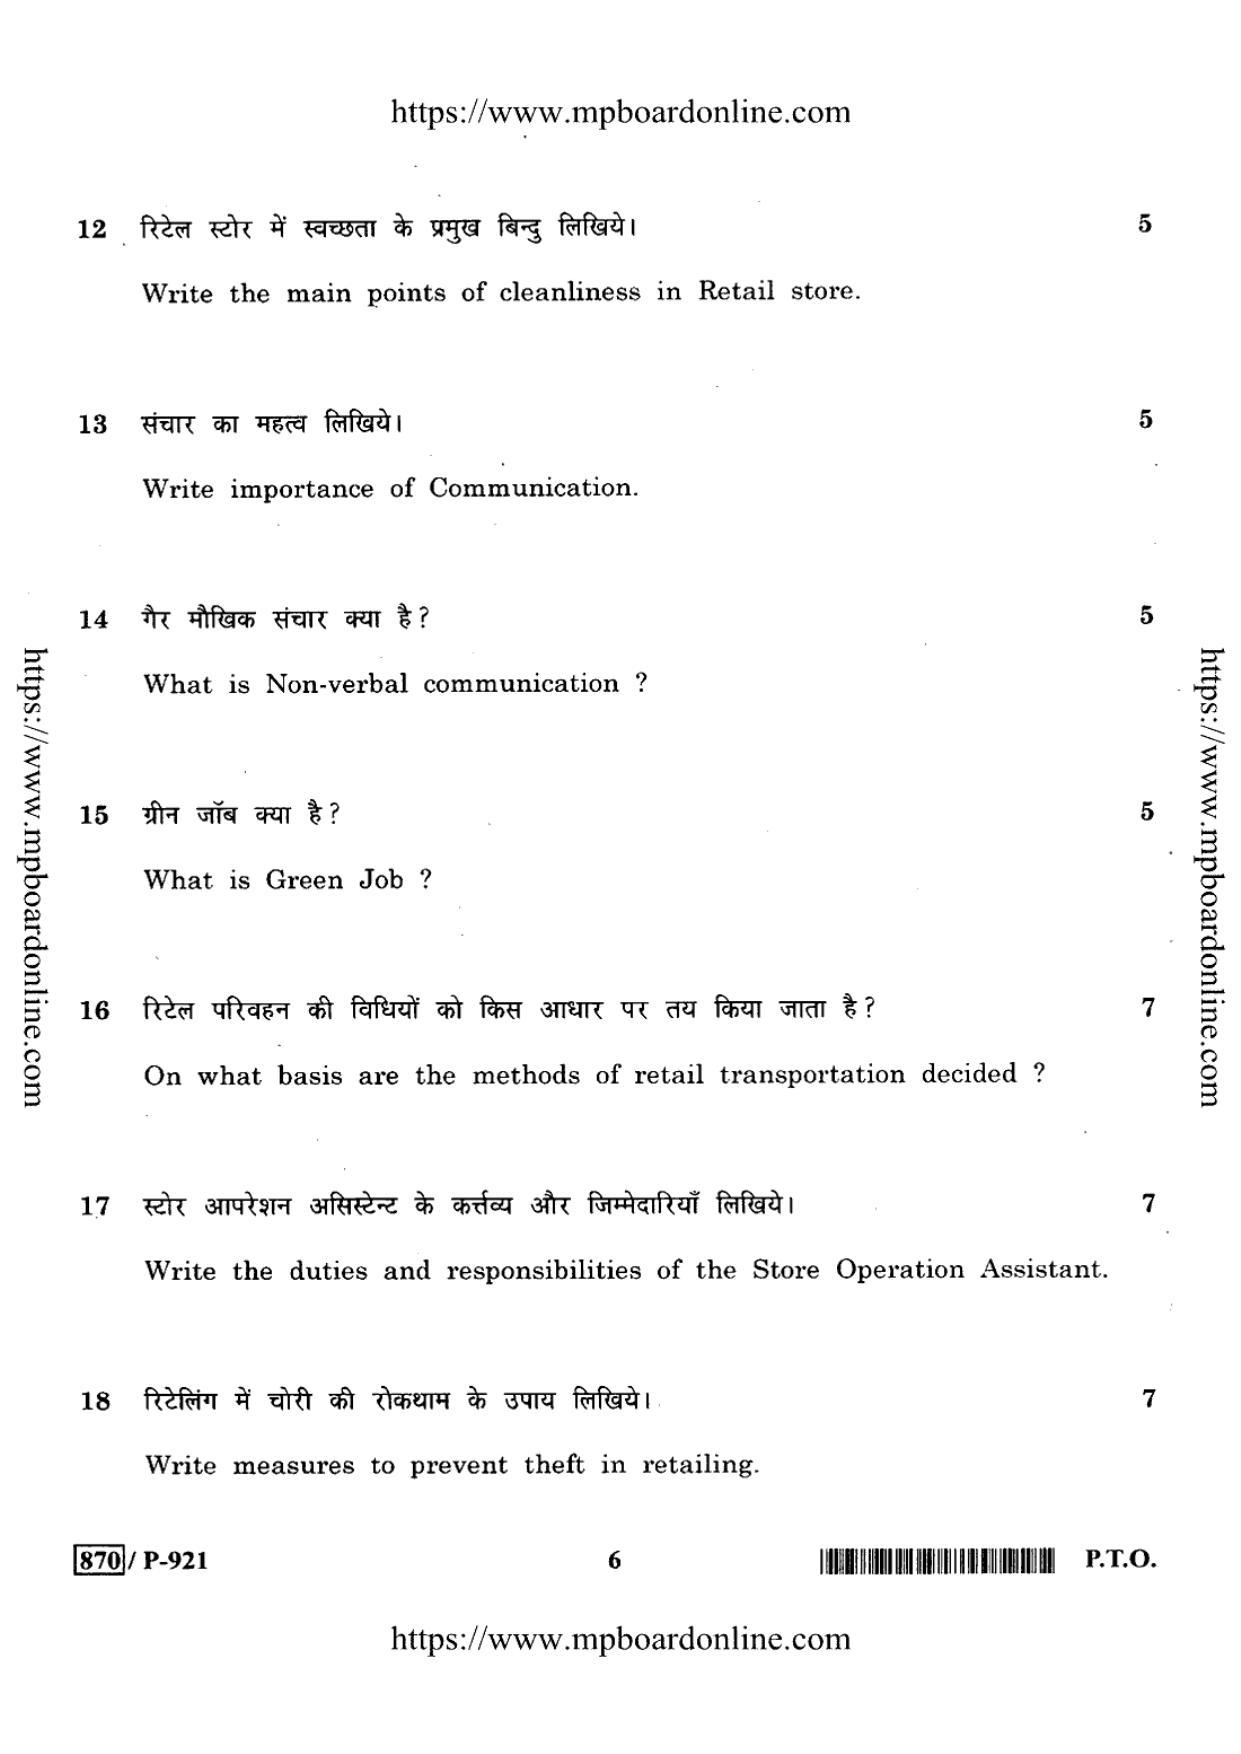 MP Board Class 10 Retail 2020 Question Paper - Page 6